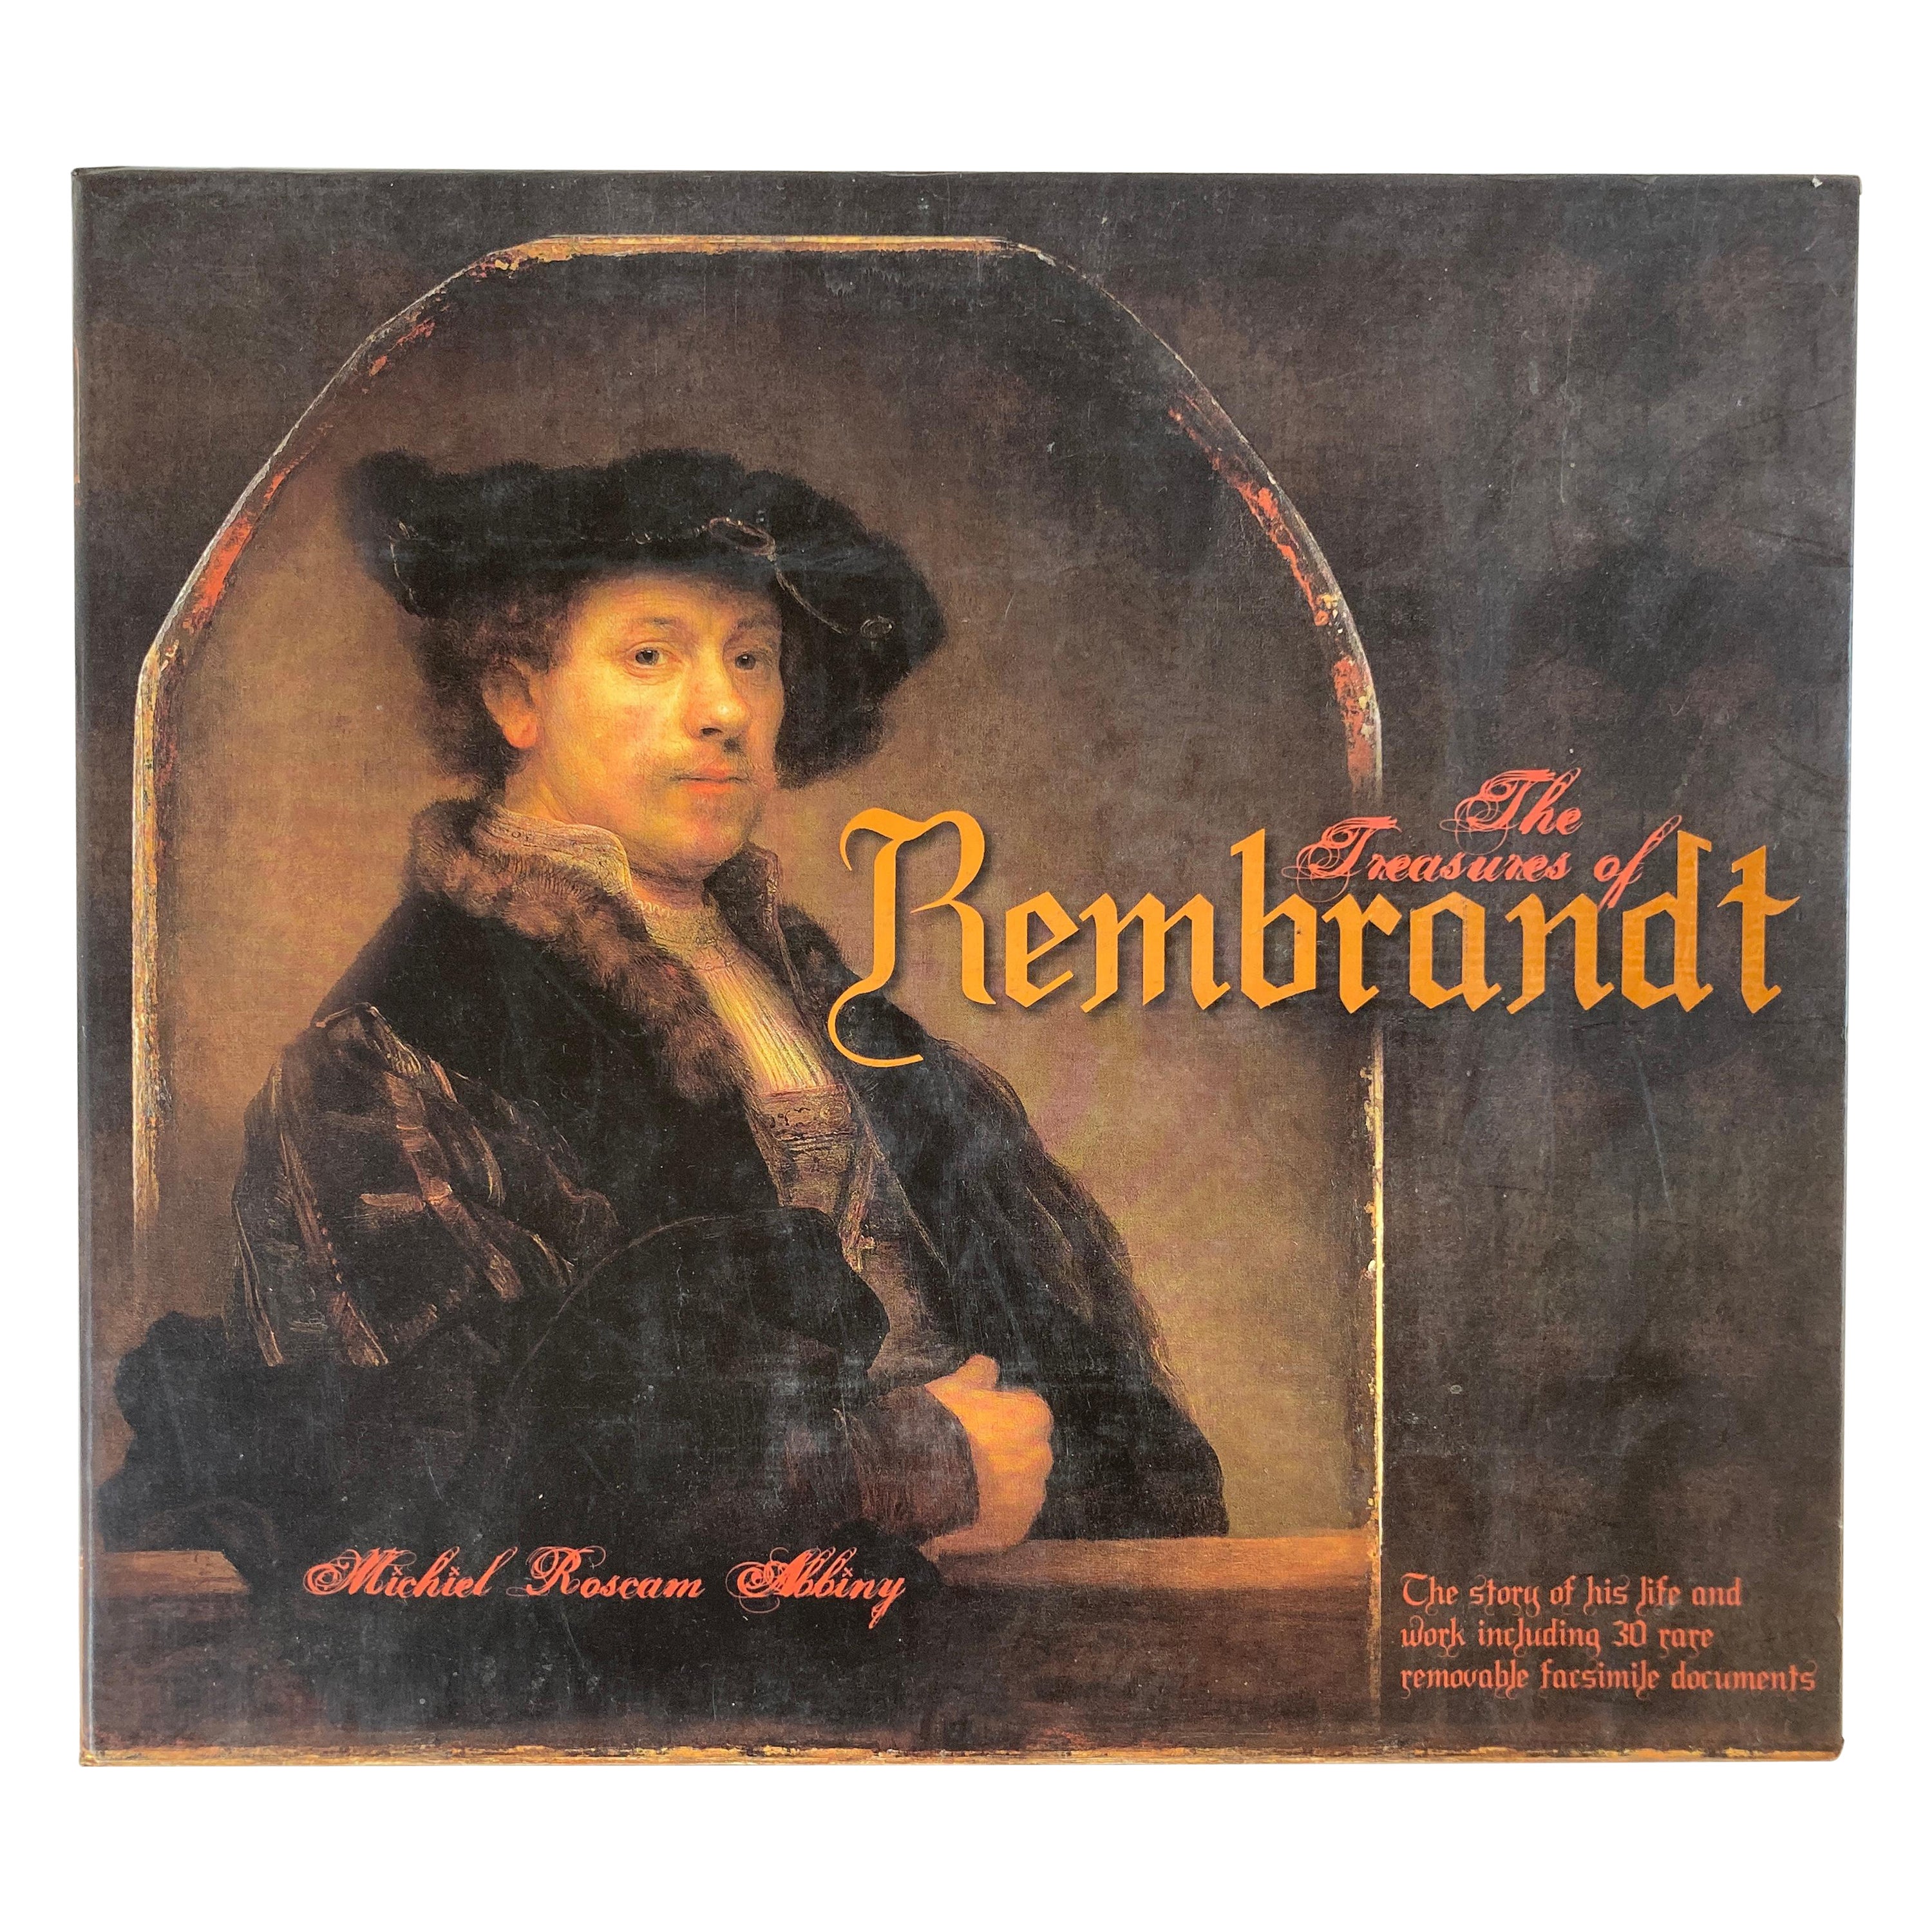 The Treasures of Rembrandt Book by Michiel Roscam Abbing Art Gallery Book